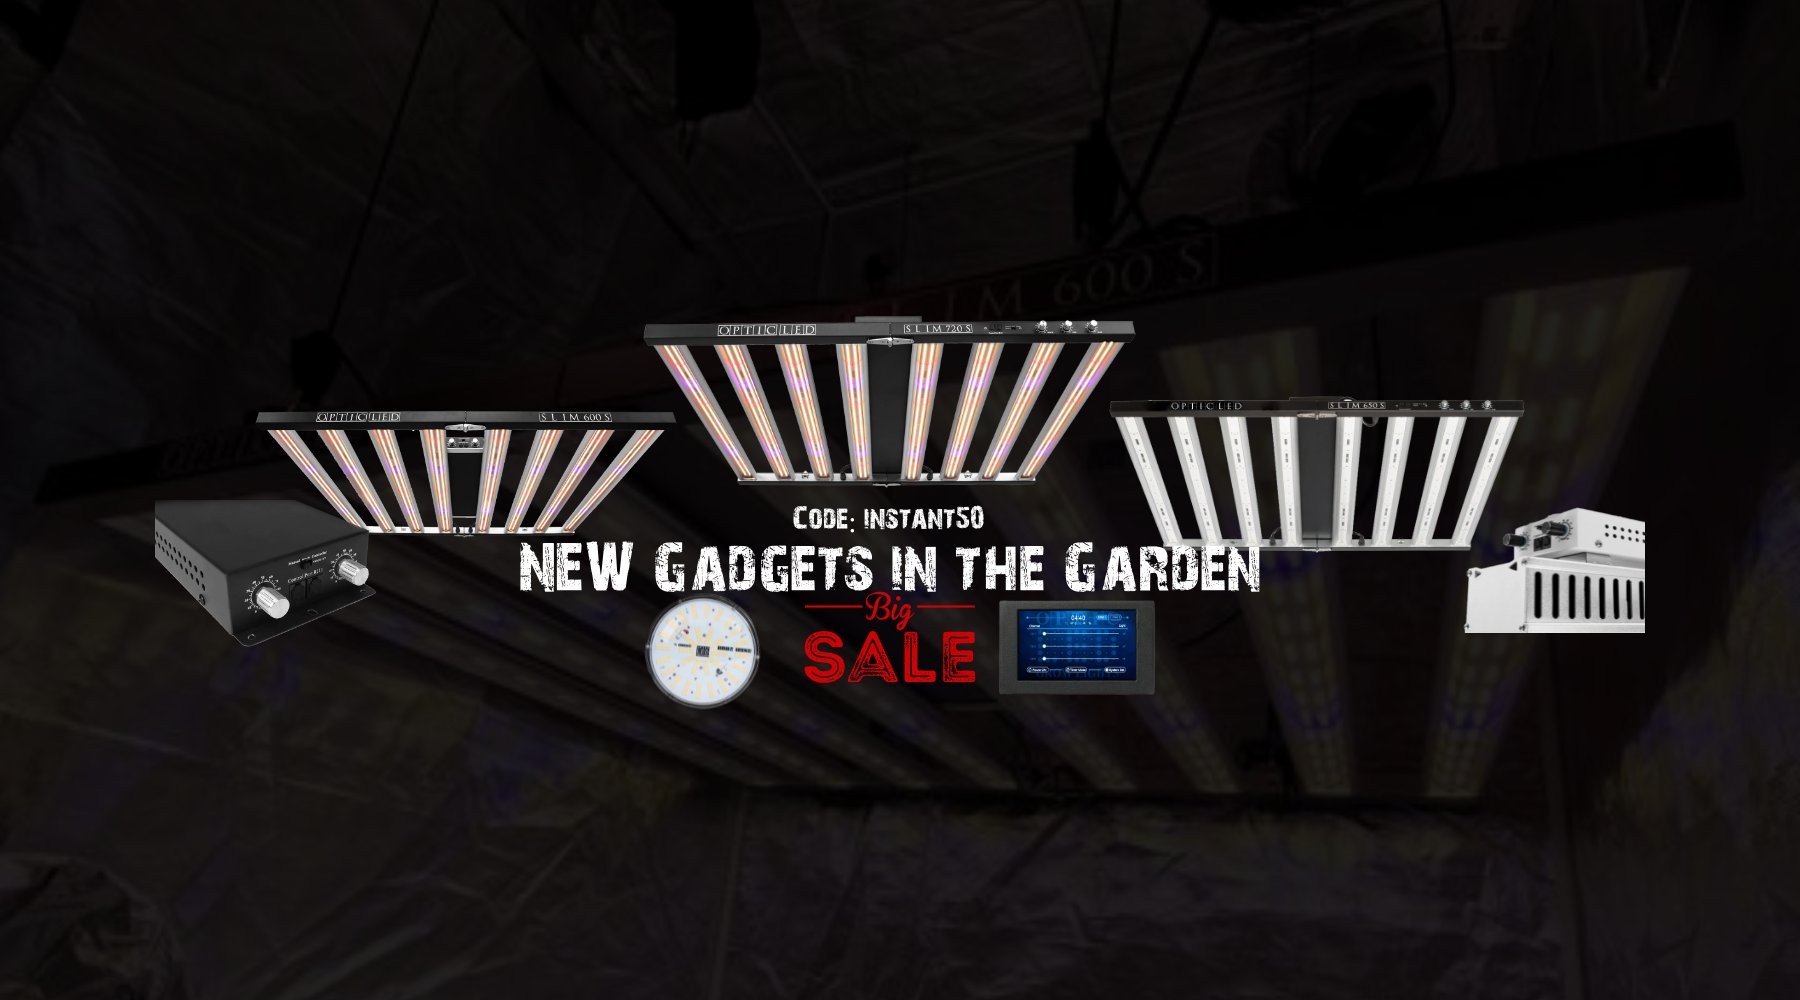 NEW Gadgets in the Garden Sale! 1/19 - 2/28